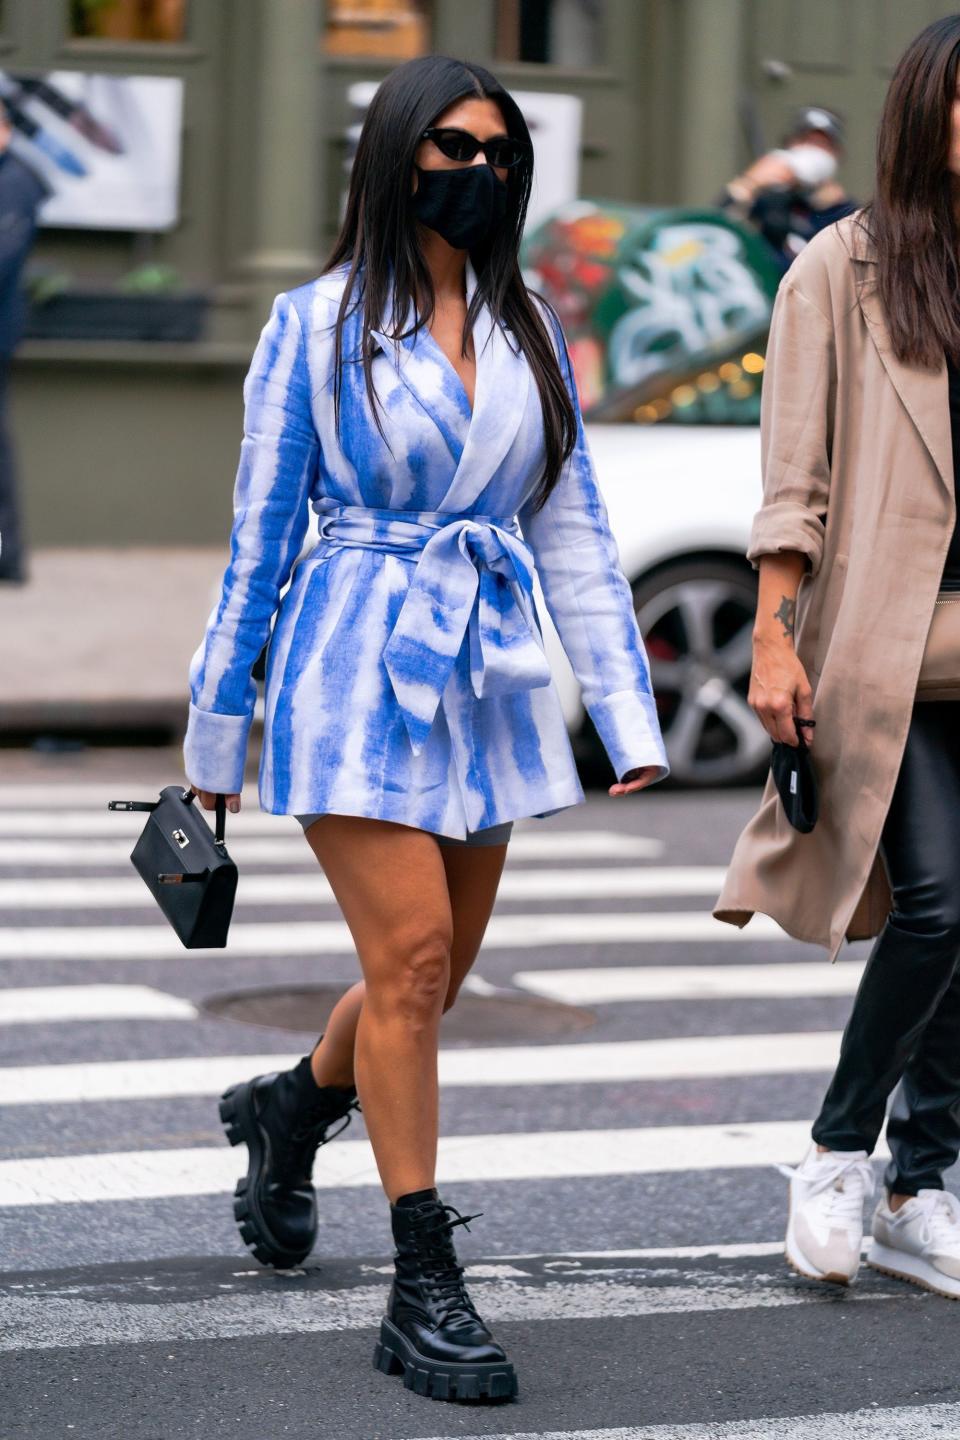 Kourtney in a light blue tie dye belted blazer worn as a dress with a black face mask and combat boots.